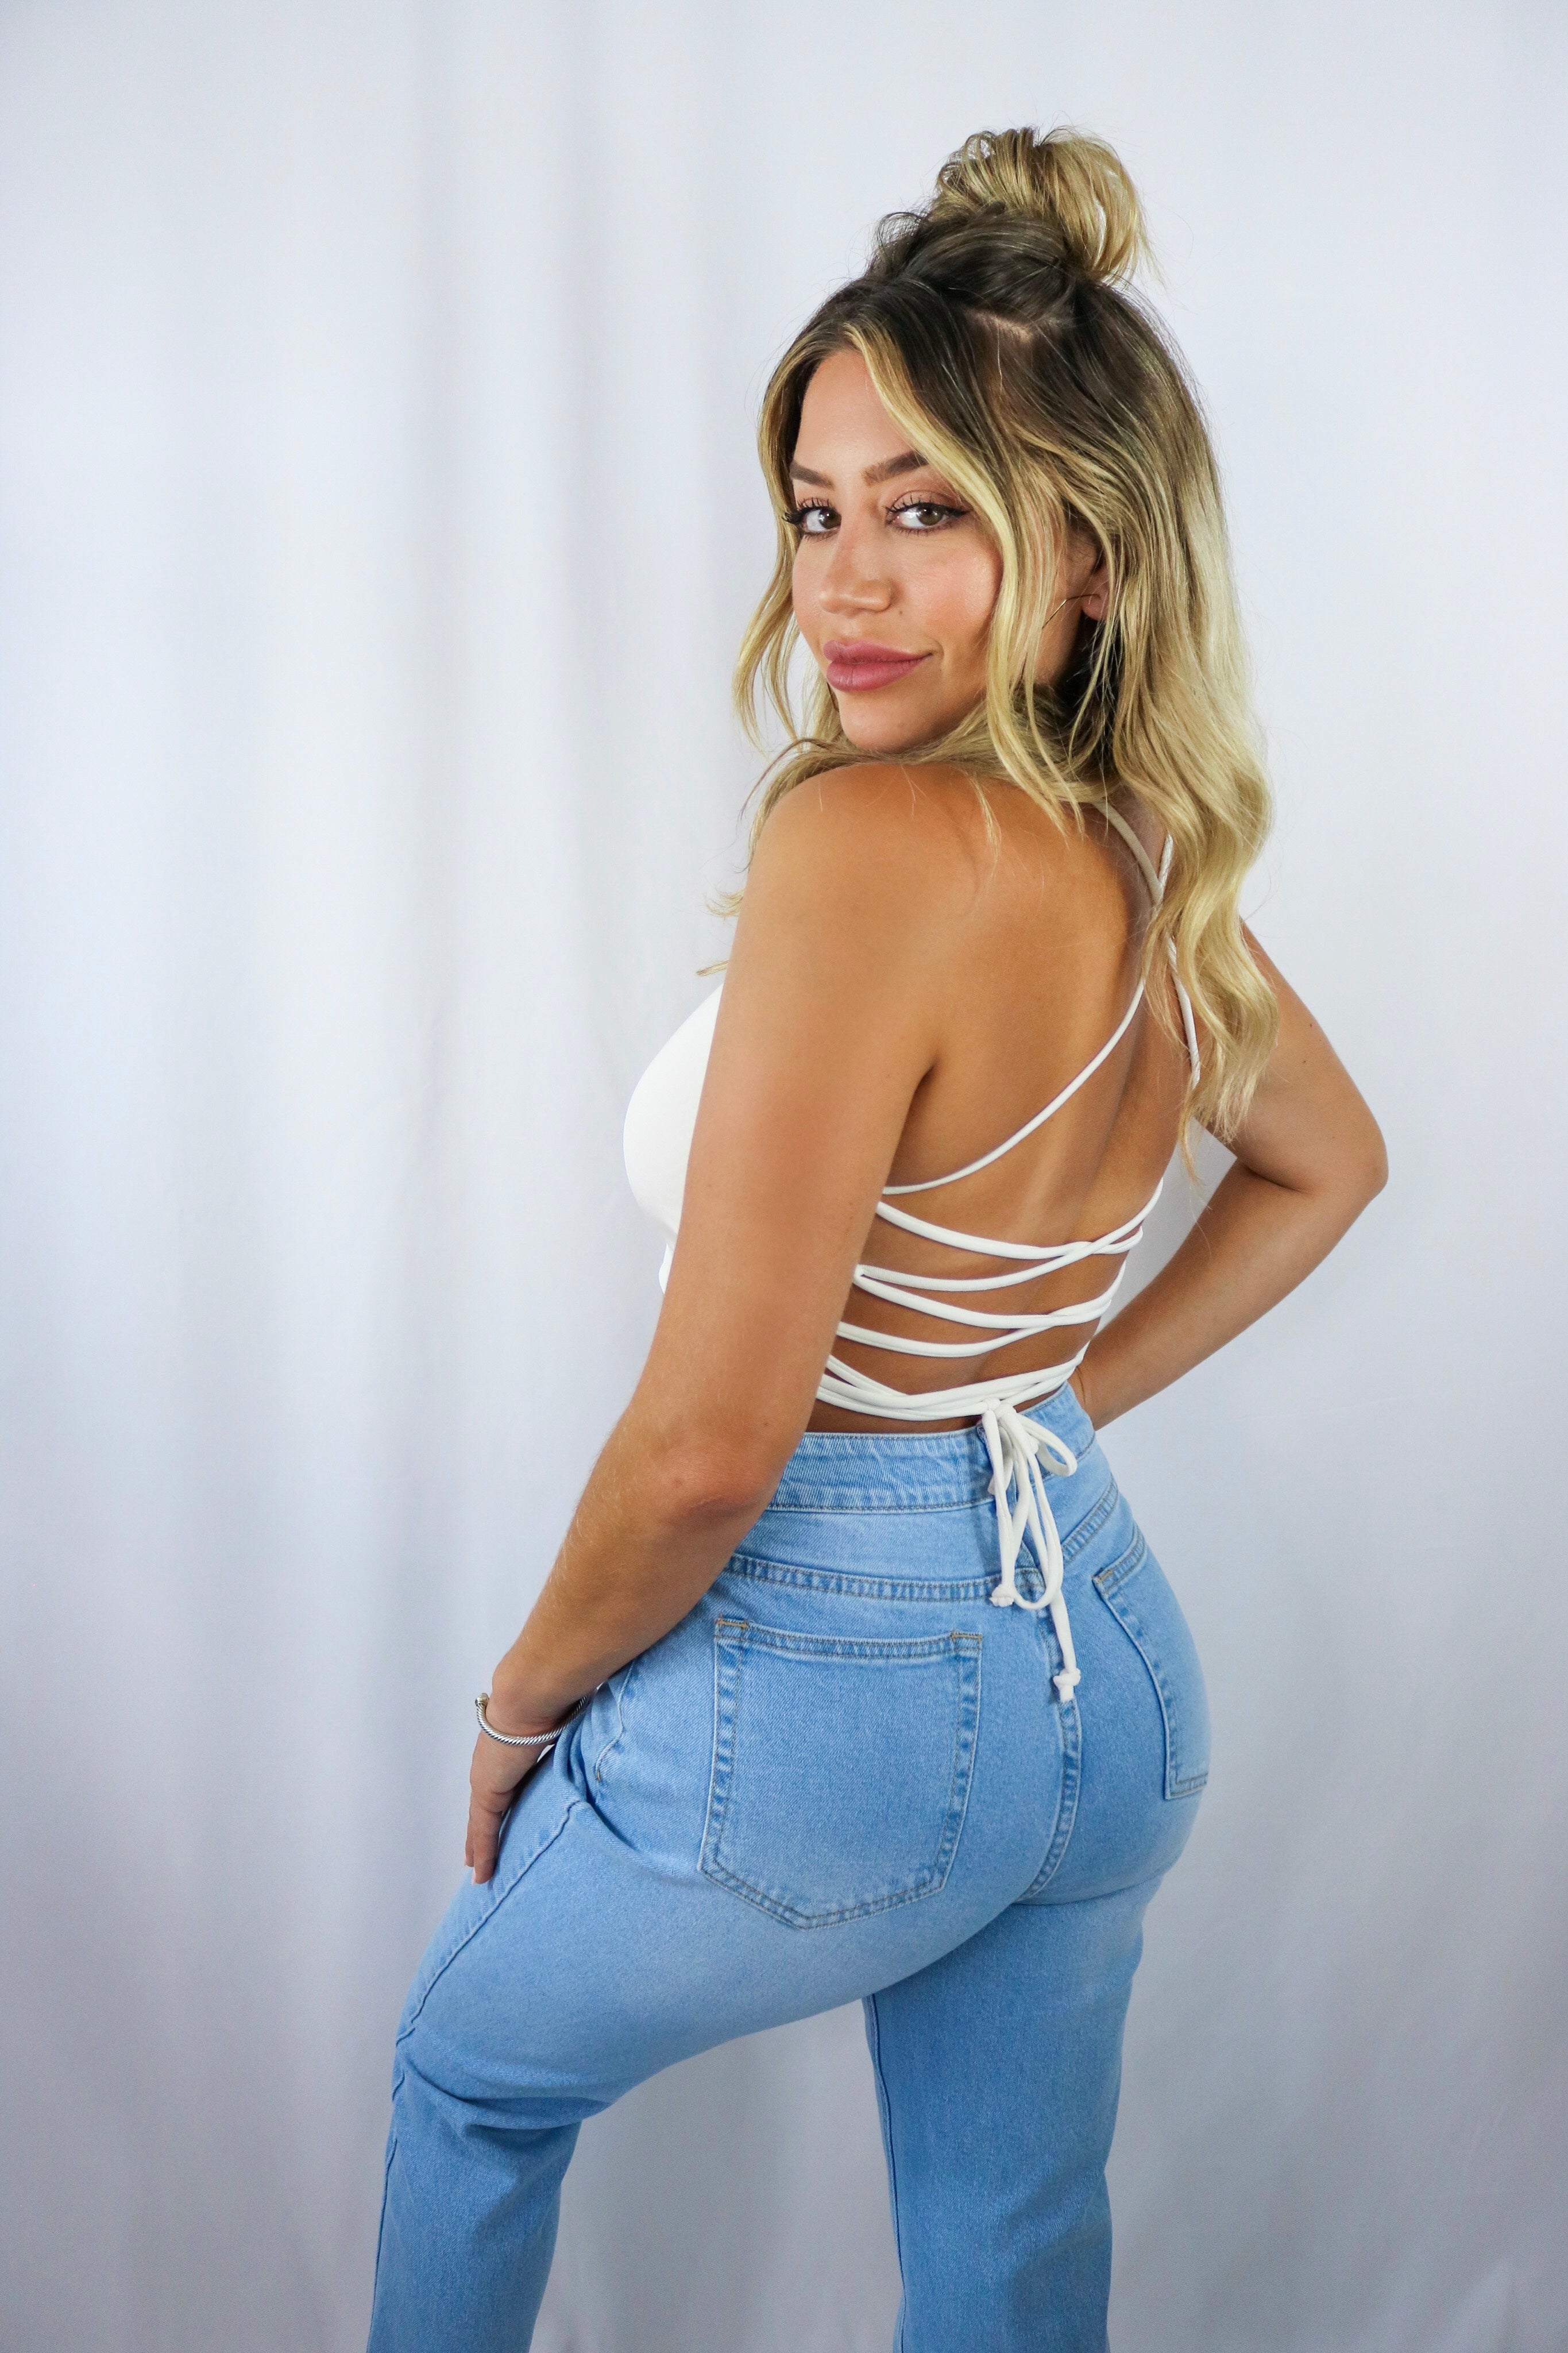 Blonde girl models a white crop top for Scarlette The Label, an online fashion boutique for women. The white crop has criss cross (crossback) detail in the back and has adjustable strings to tighten and loosen the fit. Paired with light wash denim boyfriend jeans. 